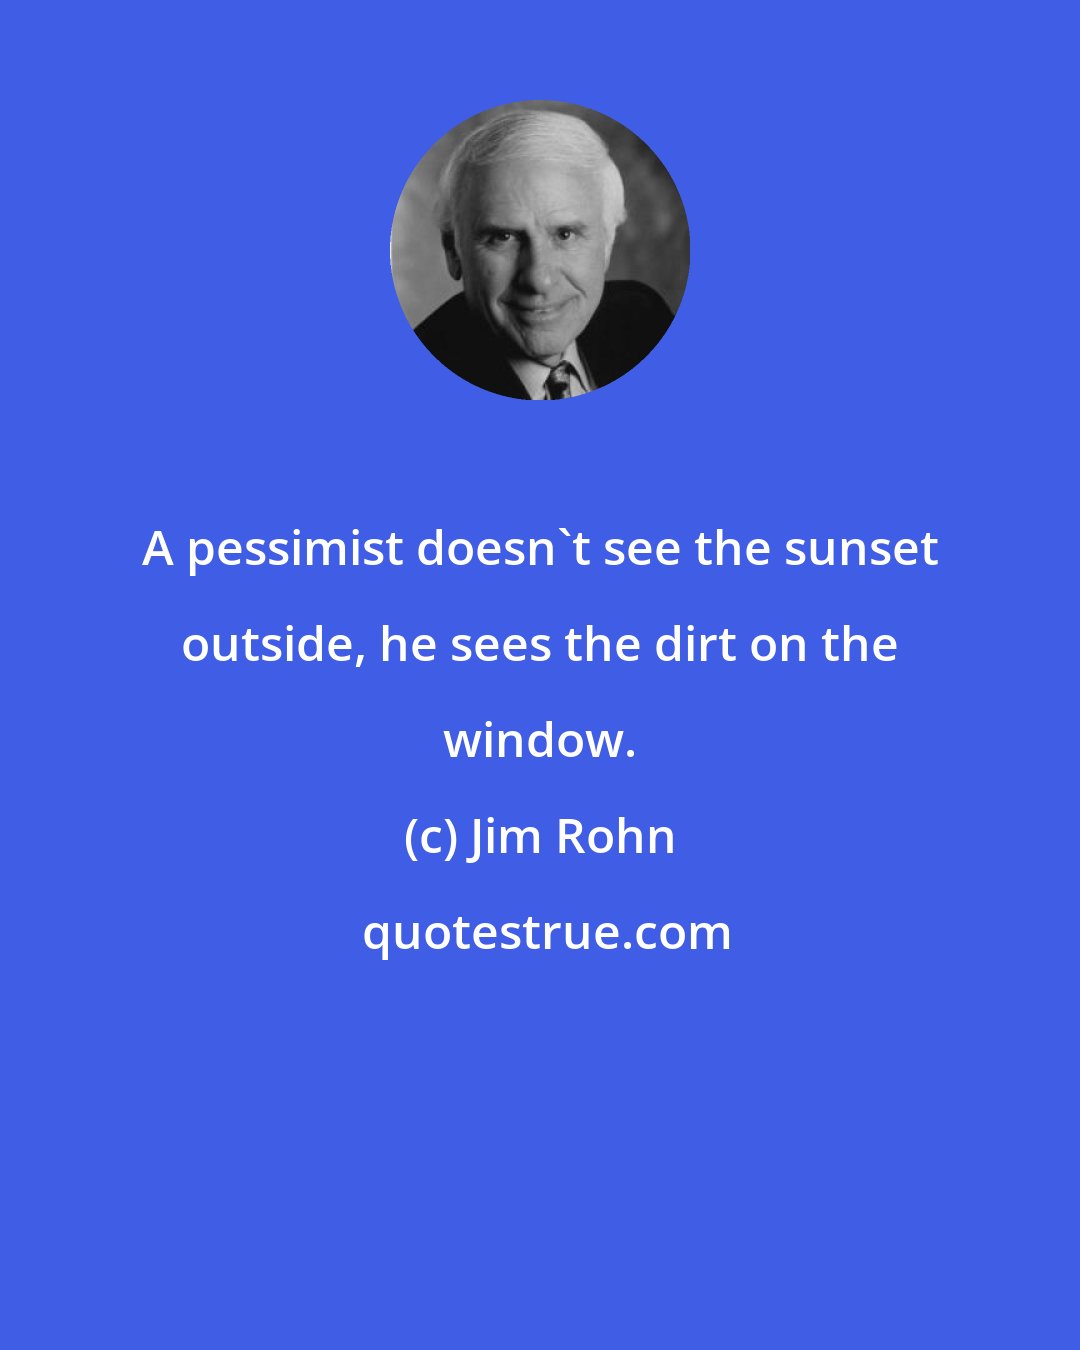 Jim Rohn: A pessimist doesn't see the sunset outside, he sees the dirt on the window.